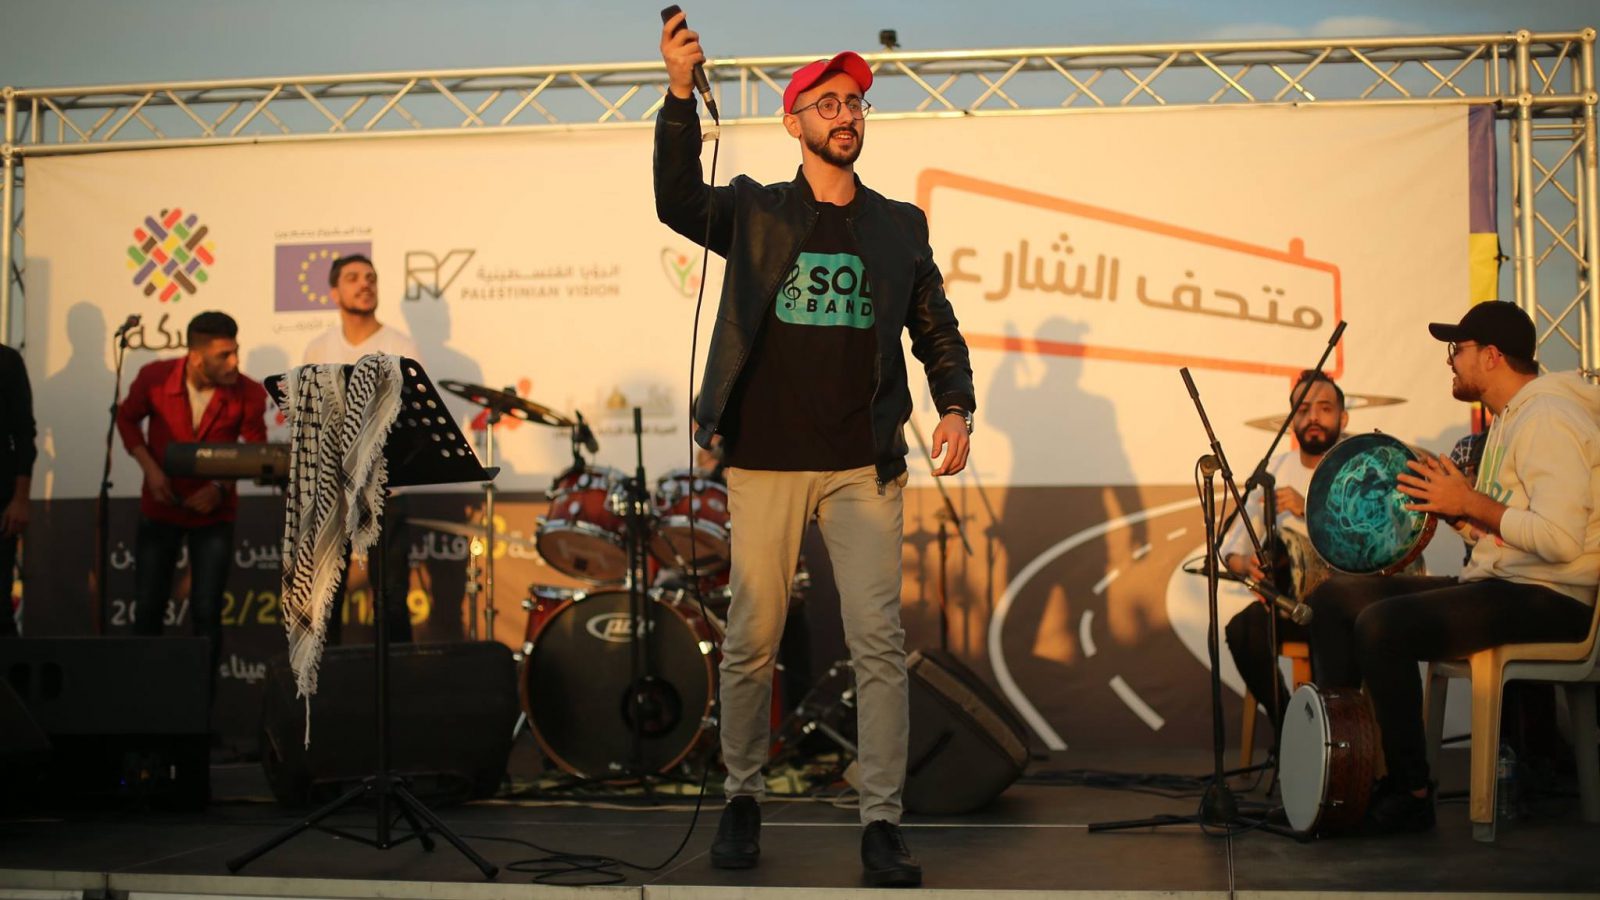 The Habkeh project, a joint initiative between EU and Palestinian artists 